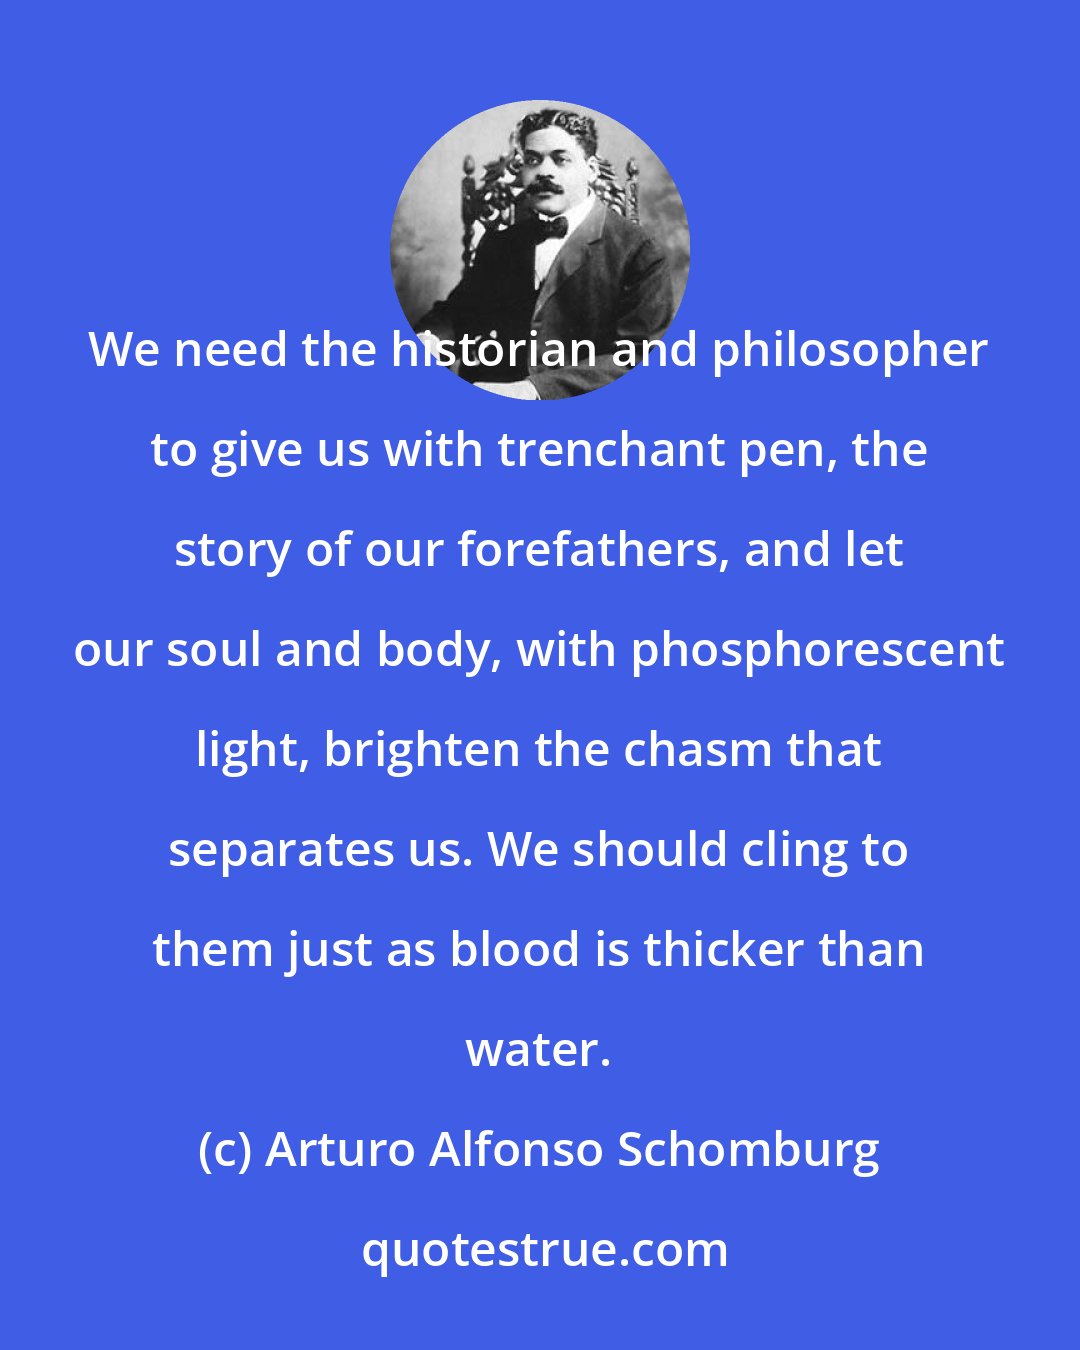 Arturo Alfonso Schomburg: We need the historian and philosopher to give us with trenchant pen, the story of our forefathers, and let our soul and body, with phosphorescent light, brighten the chasm that separates us. We should cling to them just as blood is thicker than water.